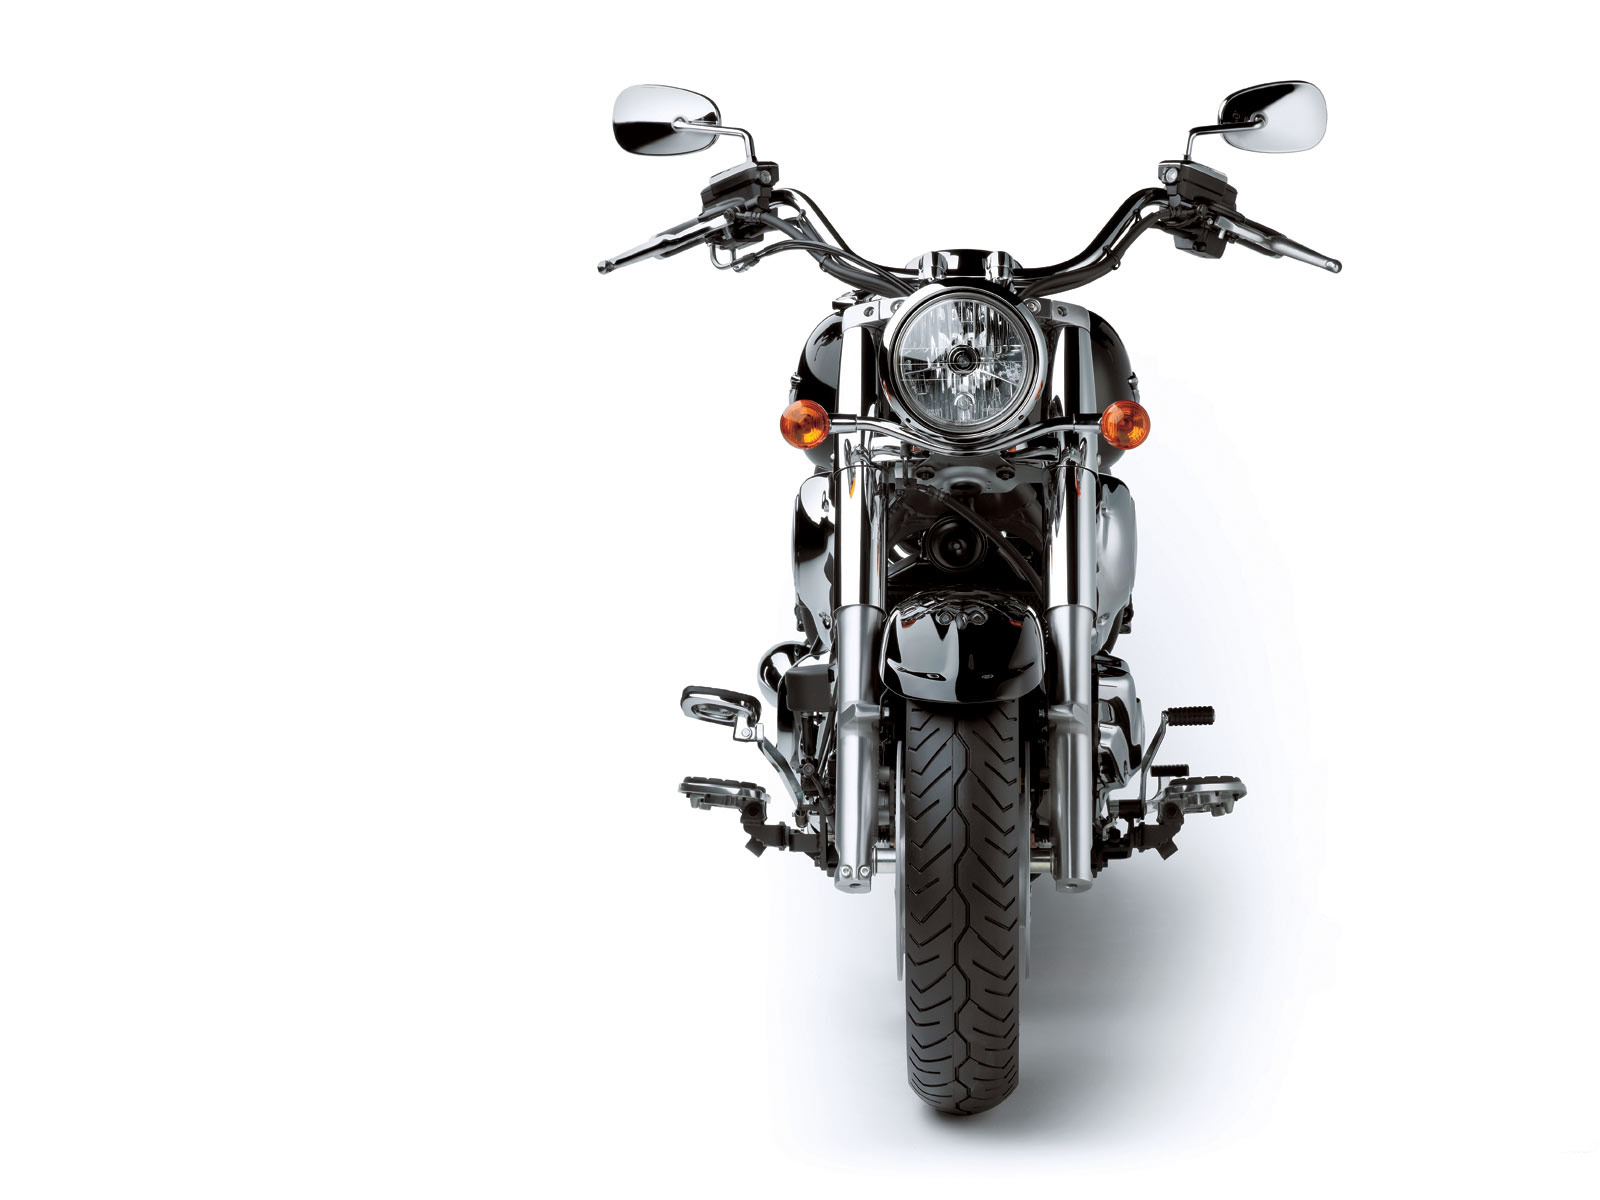 Kawasaki VN1700 Classic Motorcycle Review and Specifications.